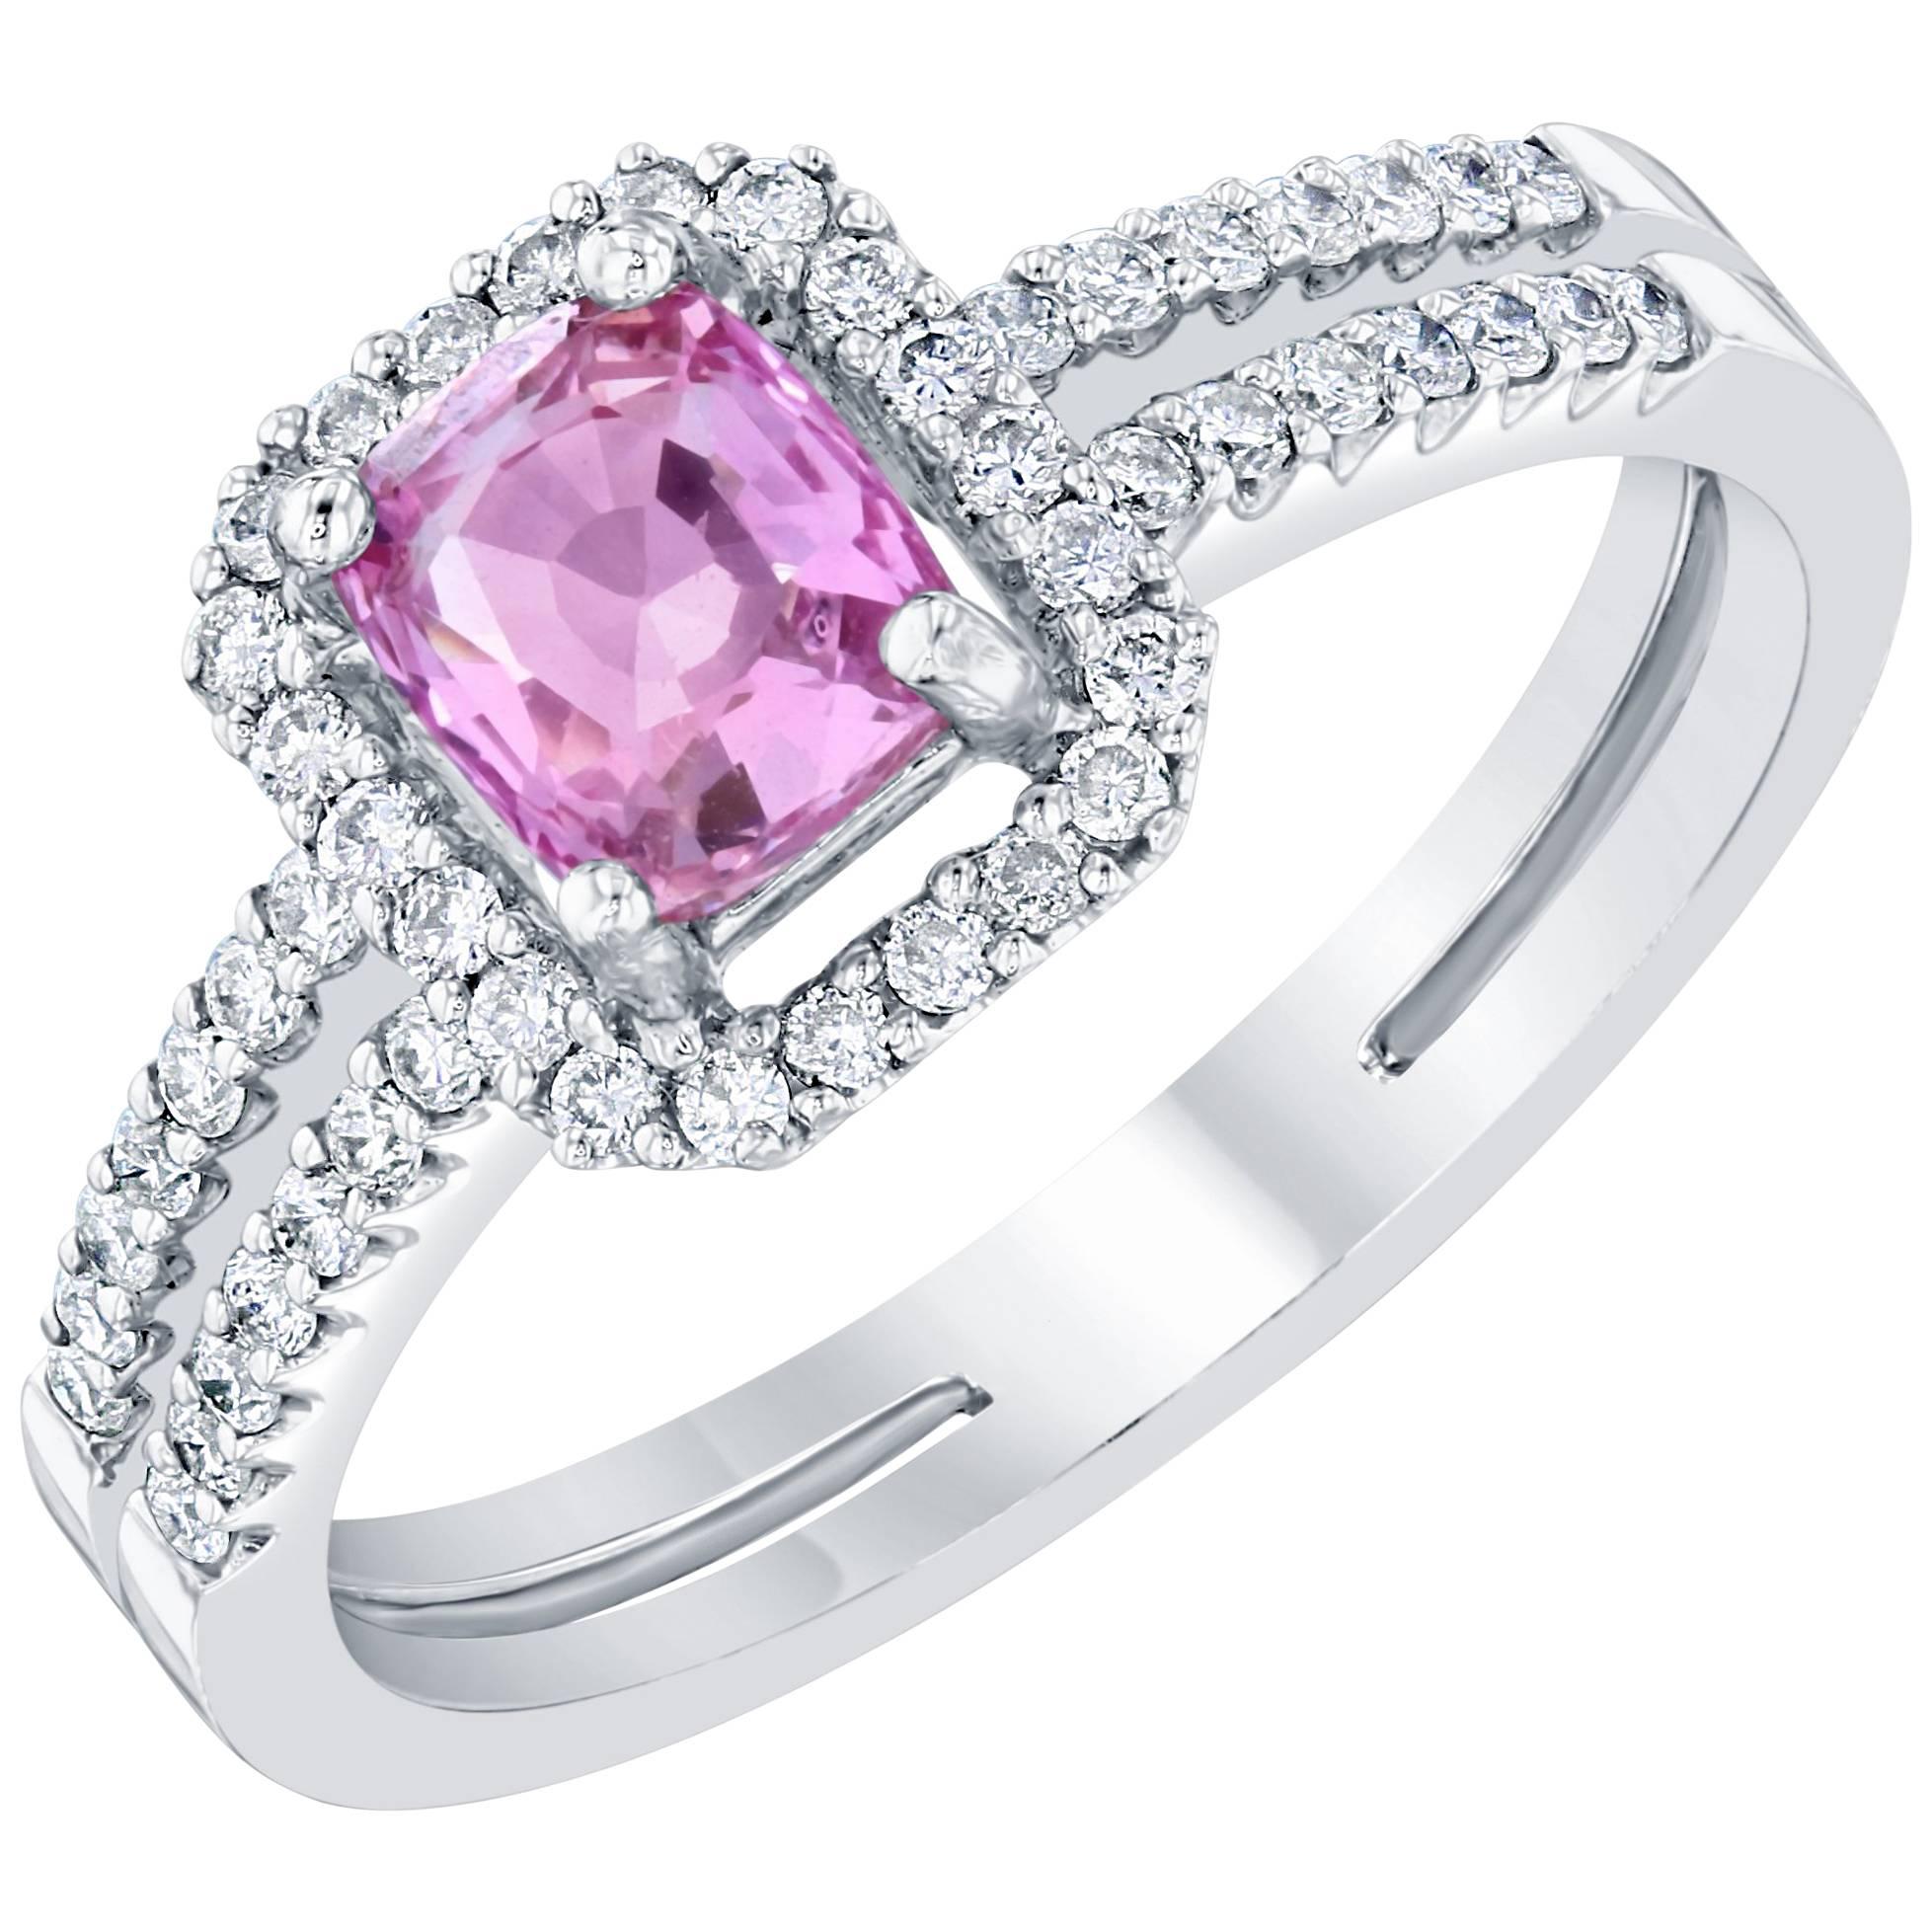 Gorgeous Pink Sapphire Diamond Ring with a beautiful setting! Can be a very unique Engagement Ring or Cocktail Ring! The GIA Certificate #: 2195053396. You can see a copy of the certificate on the GIA website. 

The center Cushion Cut Pink Sapphire